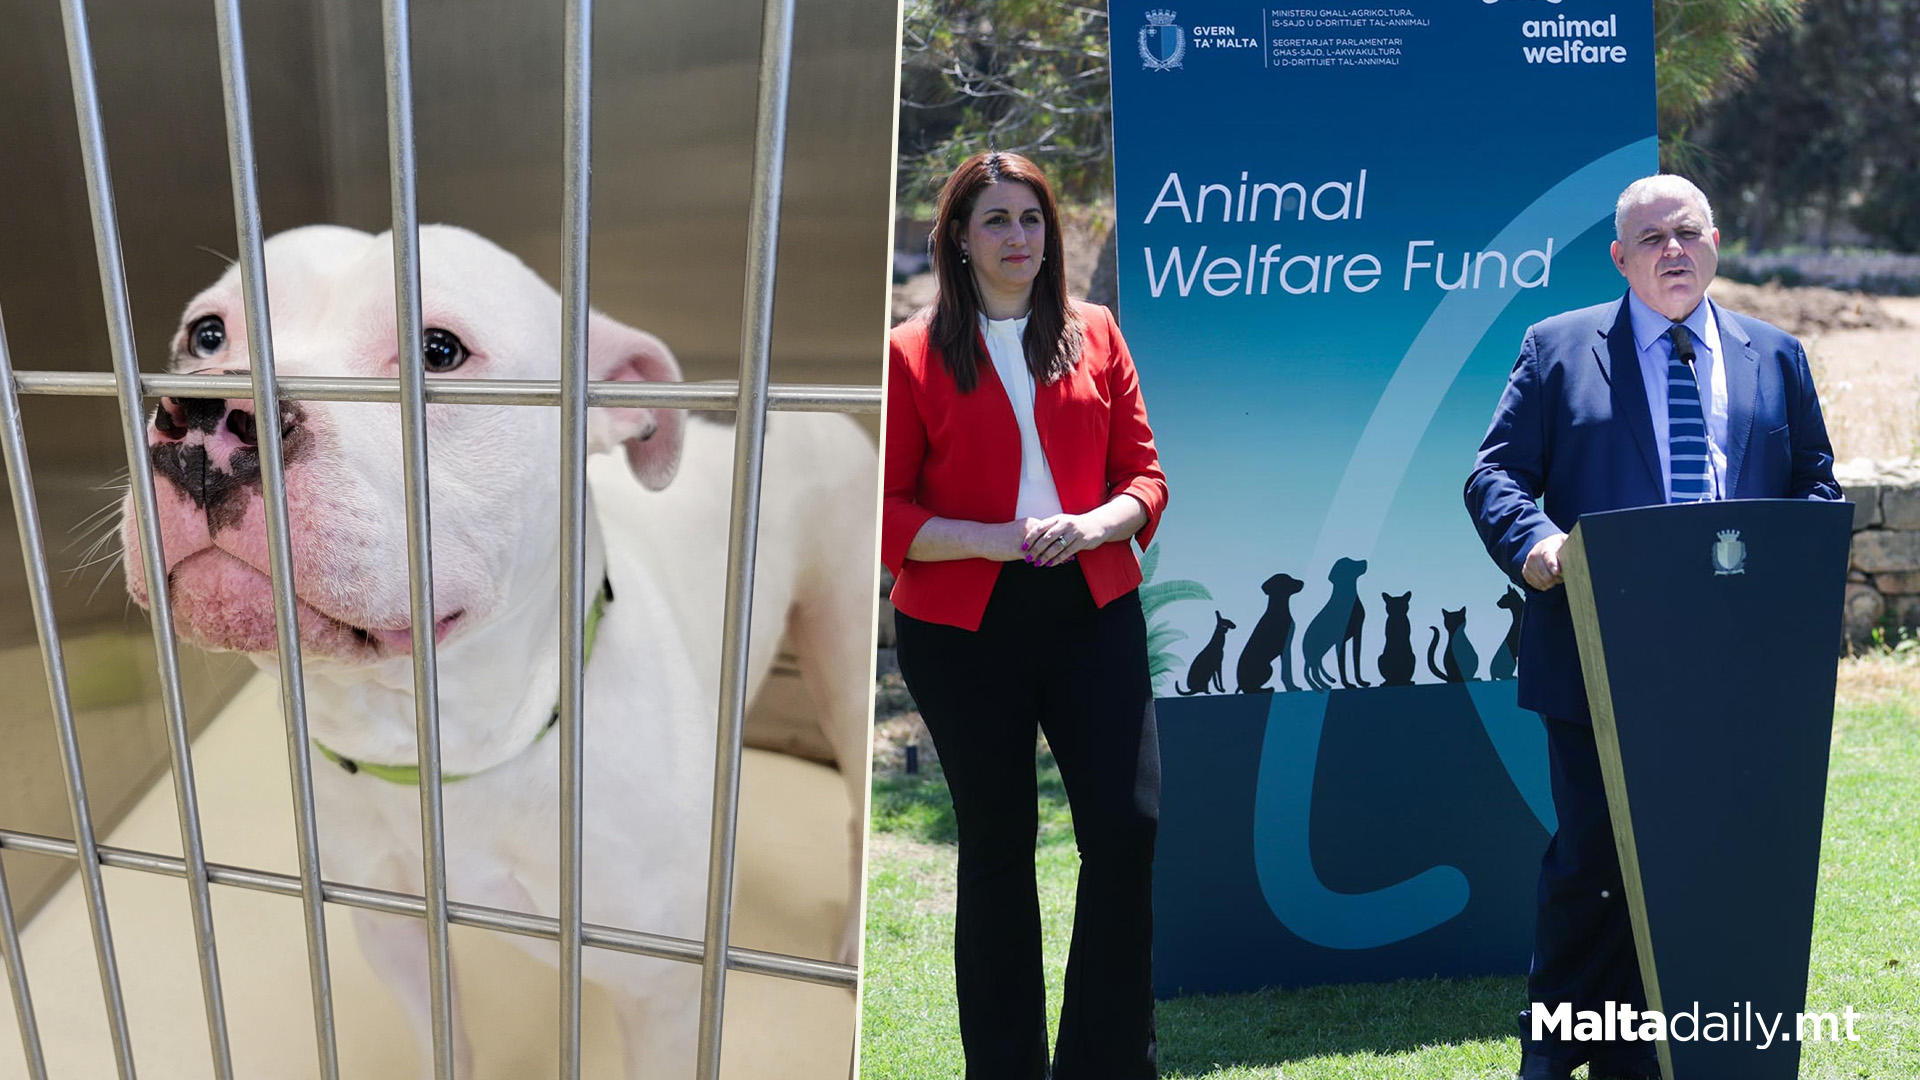 €85,000 Investment To Help Local Animal Shelters